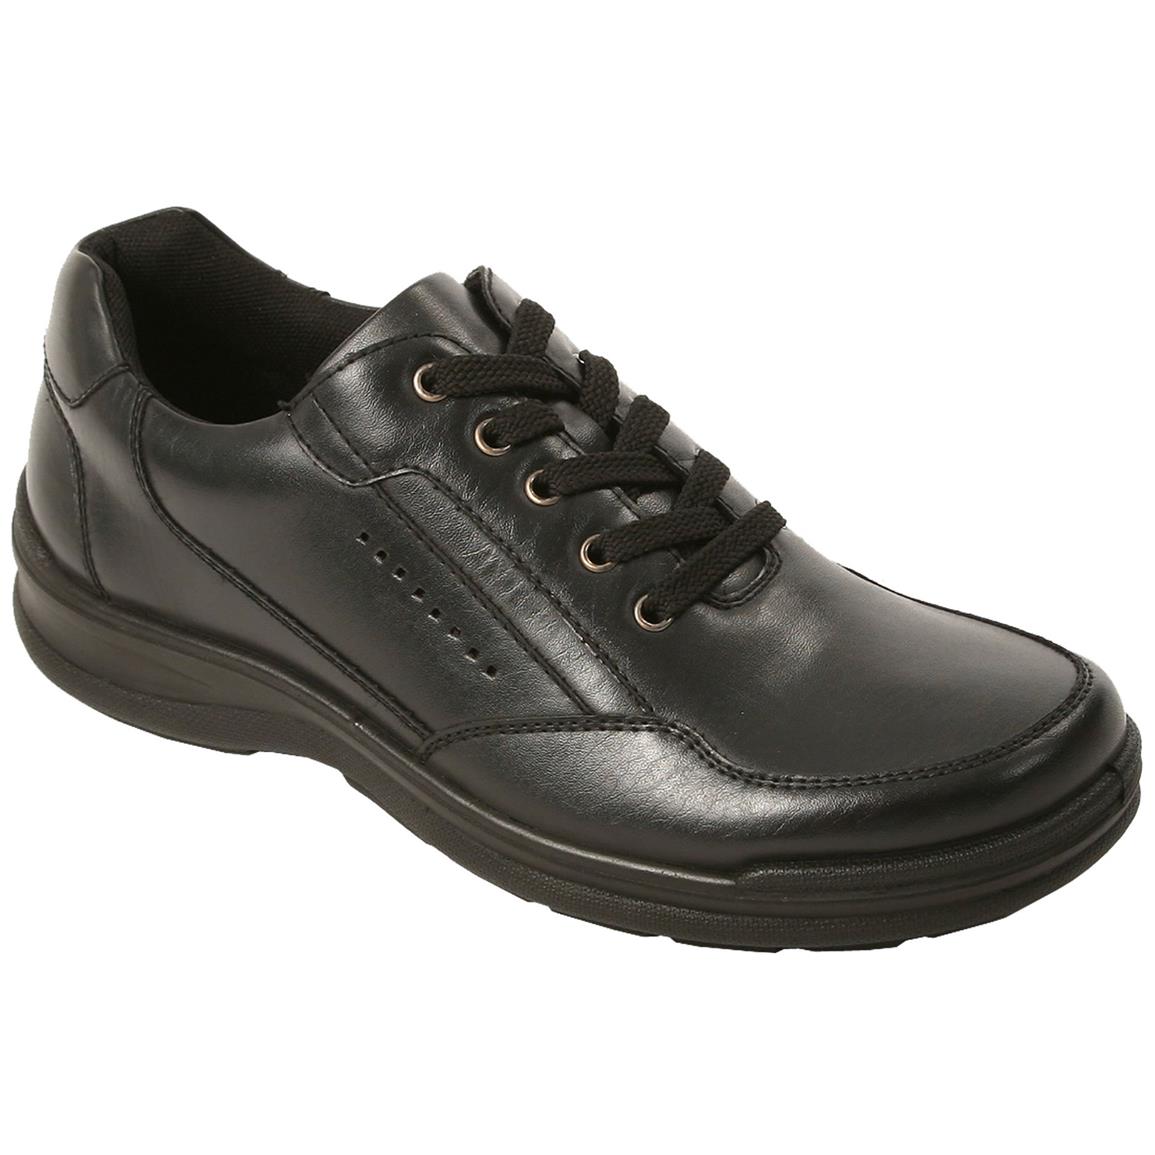 Deer Stags 902 Beam Oxford Shoes - 626024, Casual Shoes at Sportsman's ...